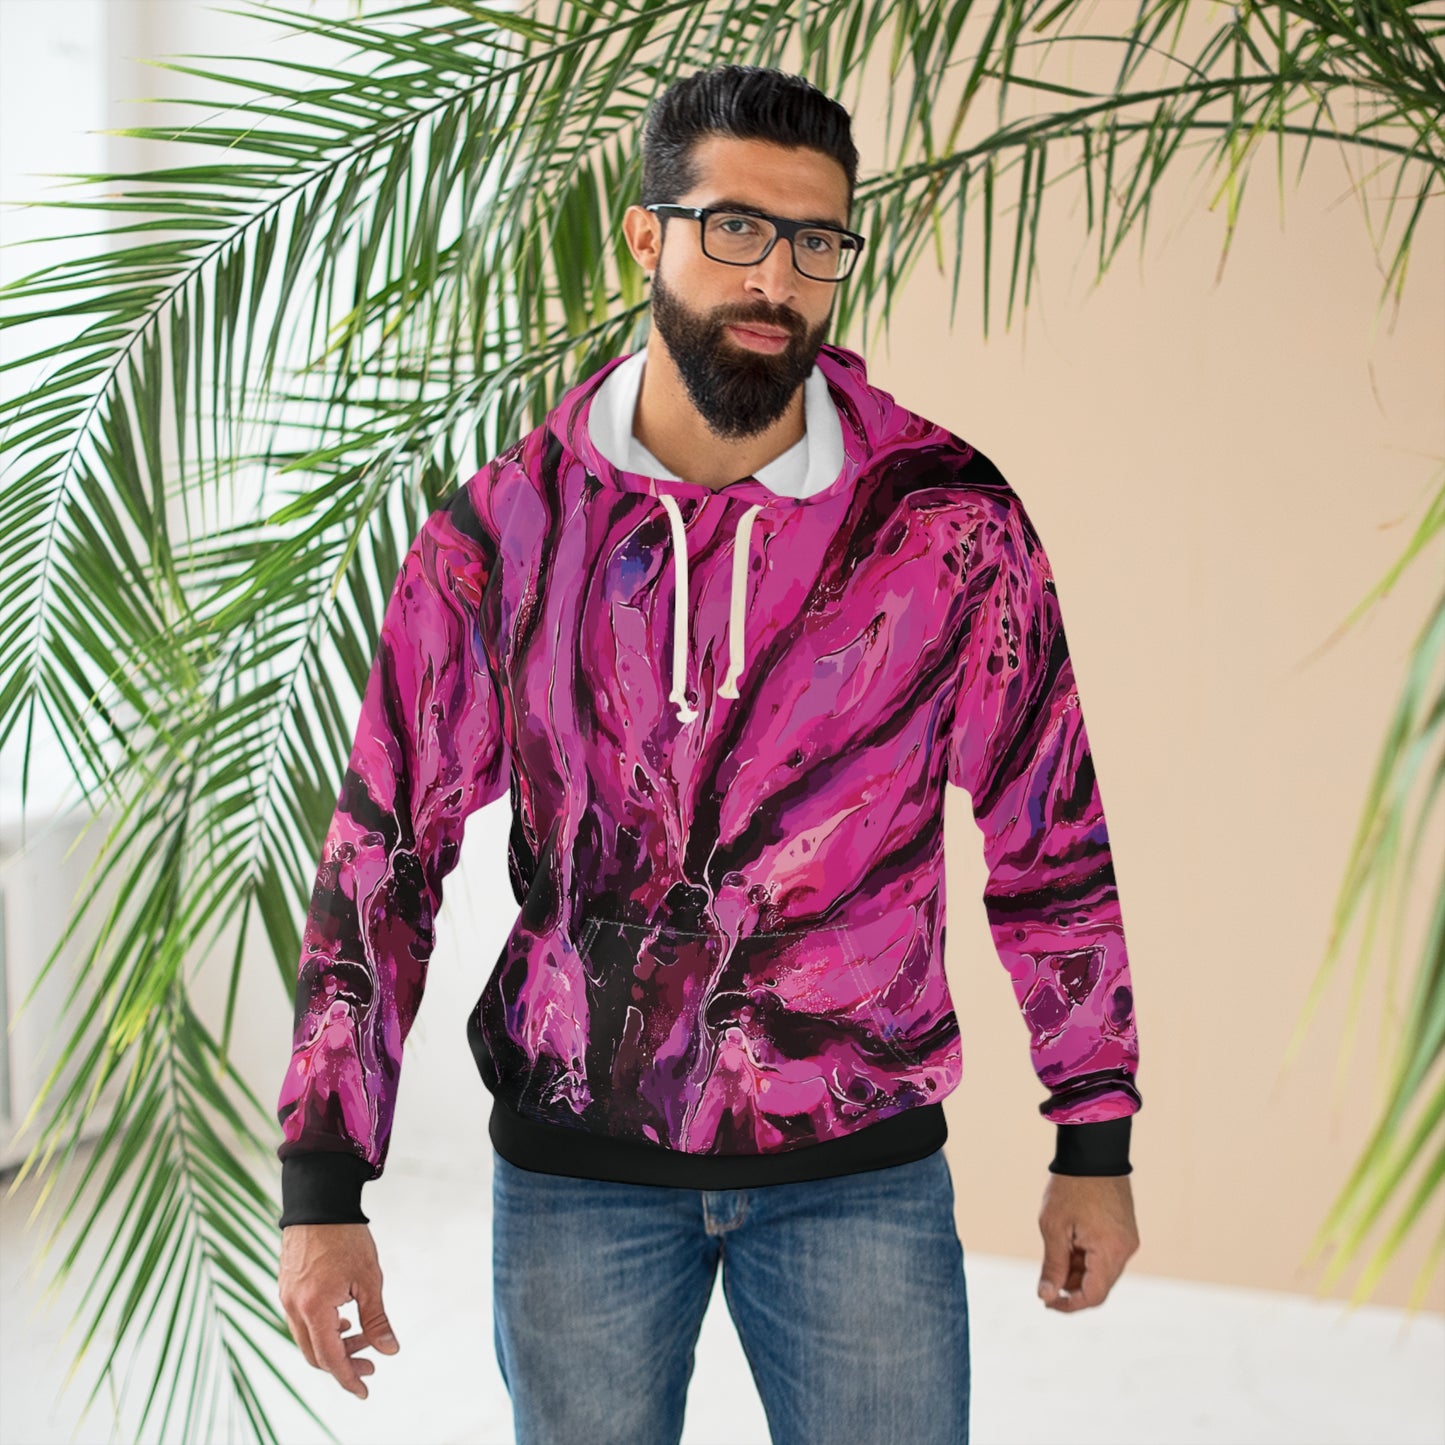 Floral Flare: All-Over Print Unisex Pullover Hoodie